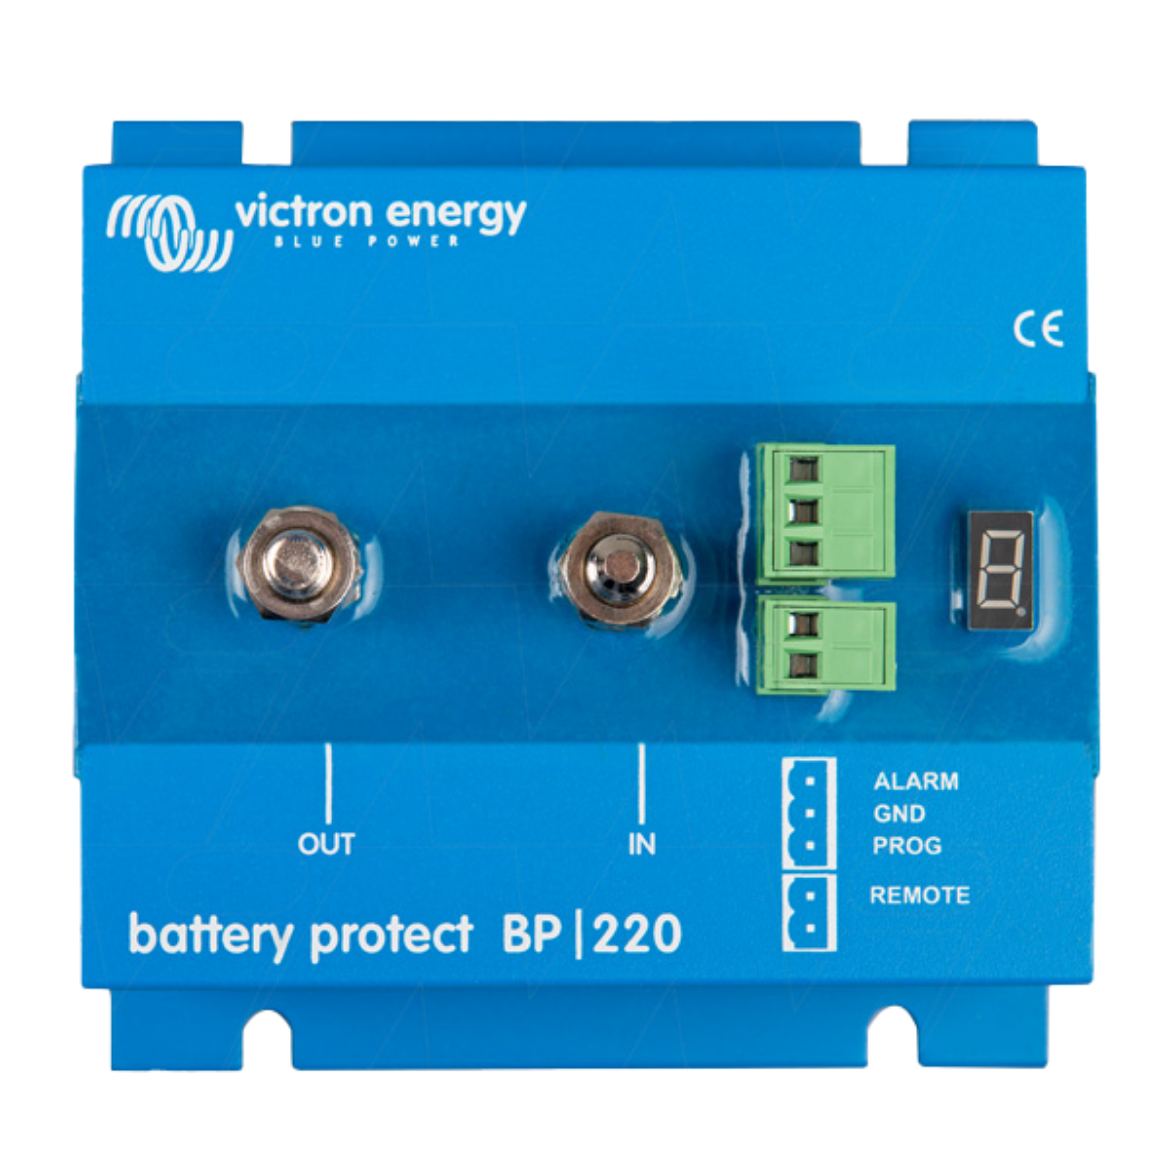 Picture of 12/24V 220A VICTRON BATTERYPROTECT 6-35VDC BATTERY PROTECTOR (BPR000220400)